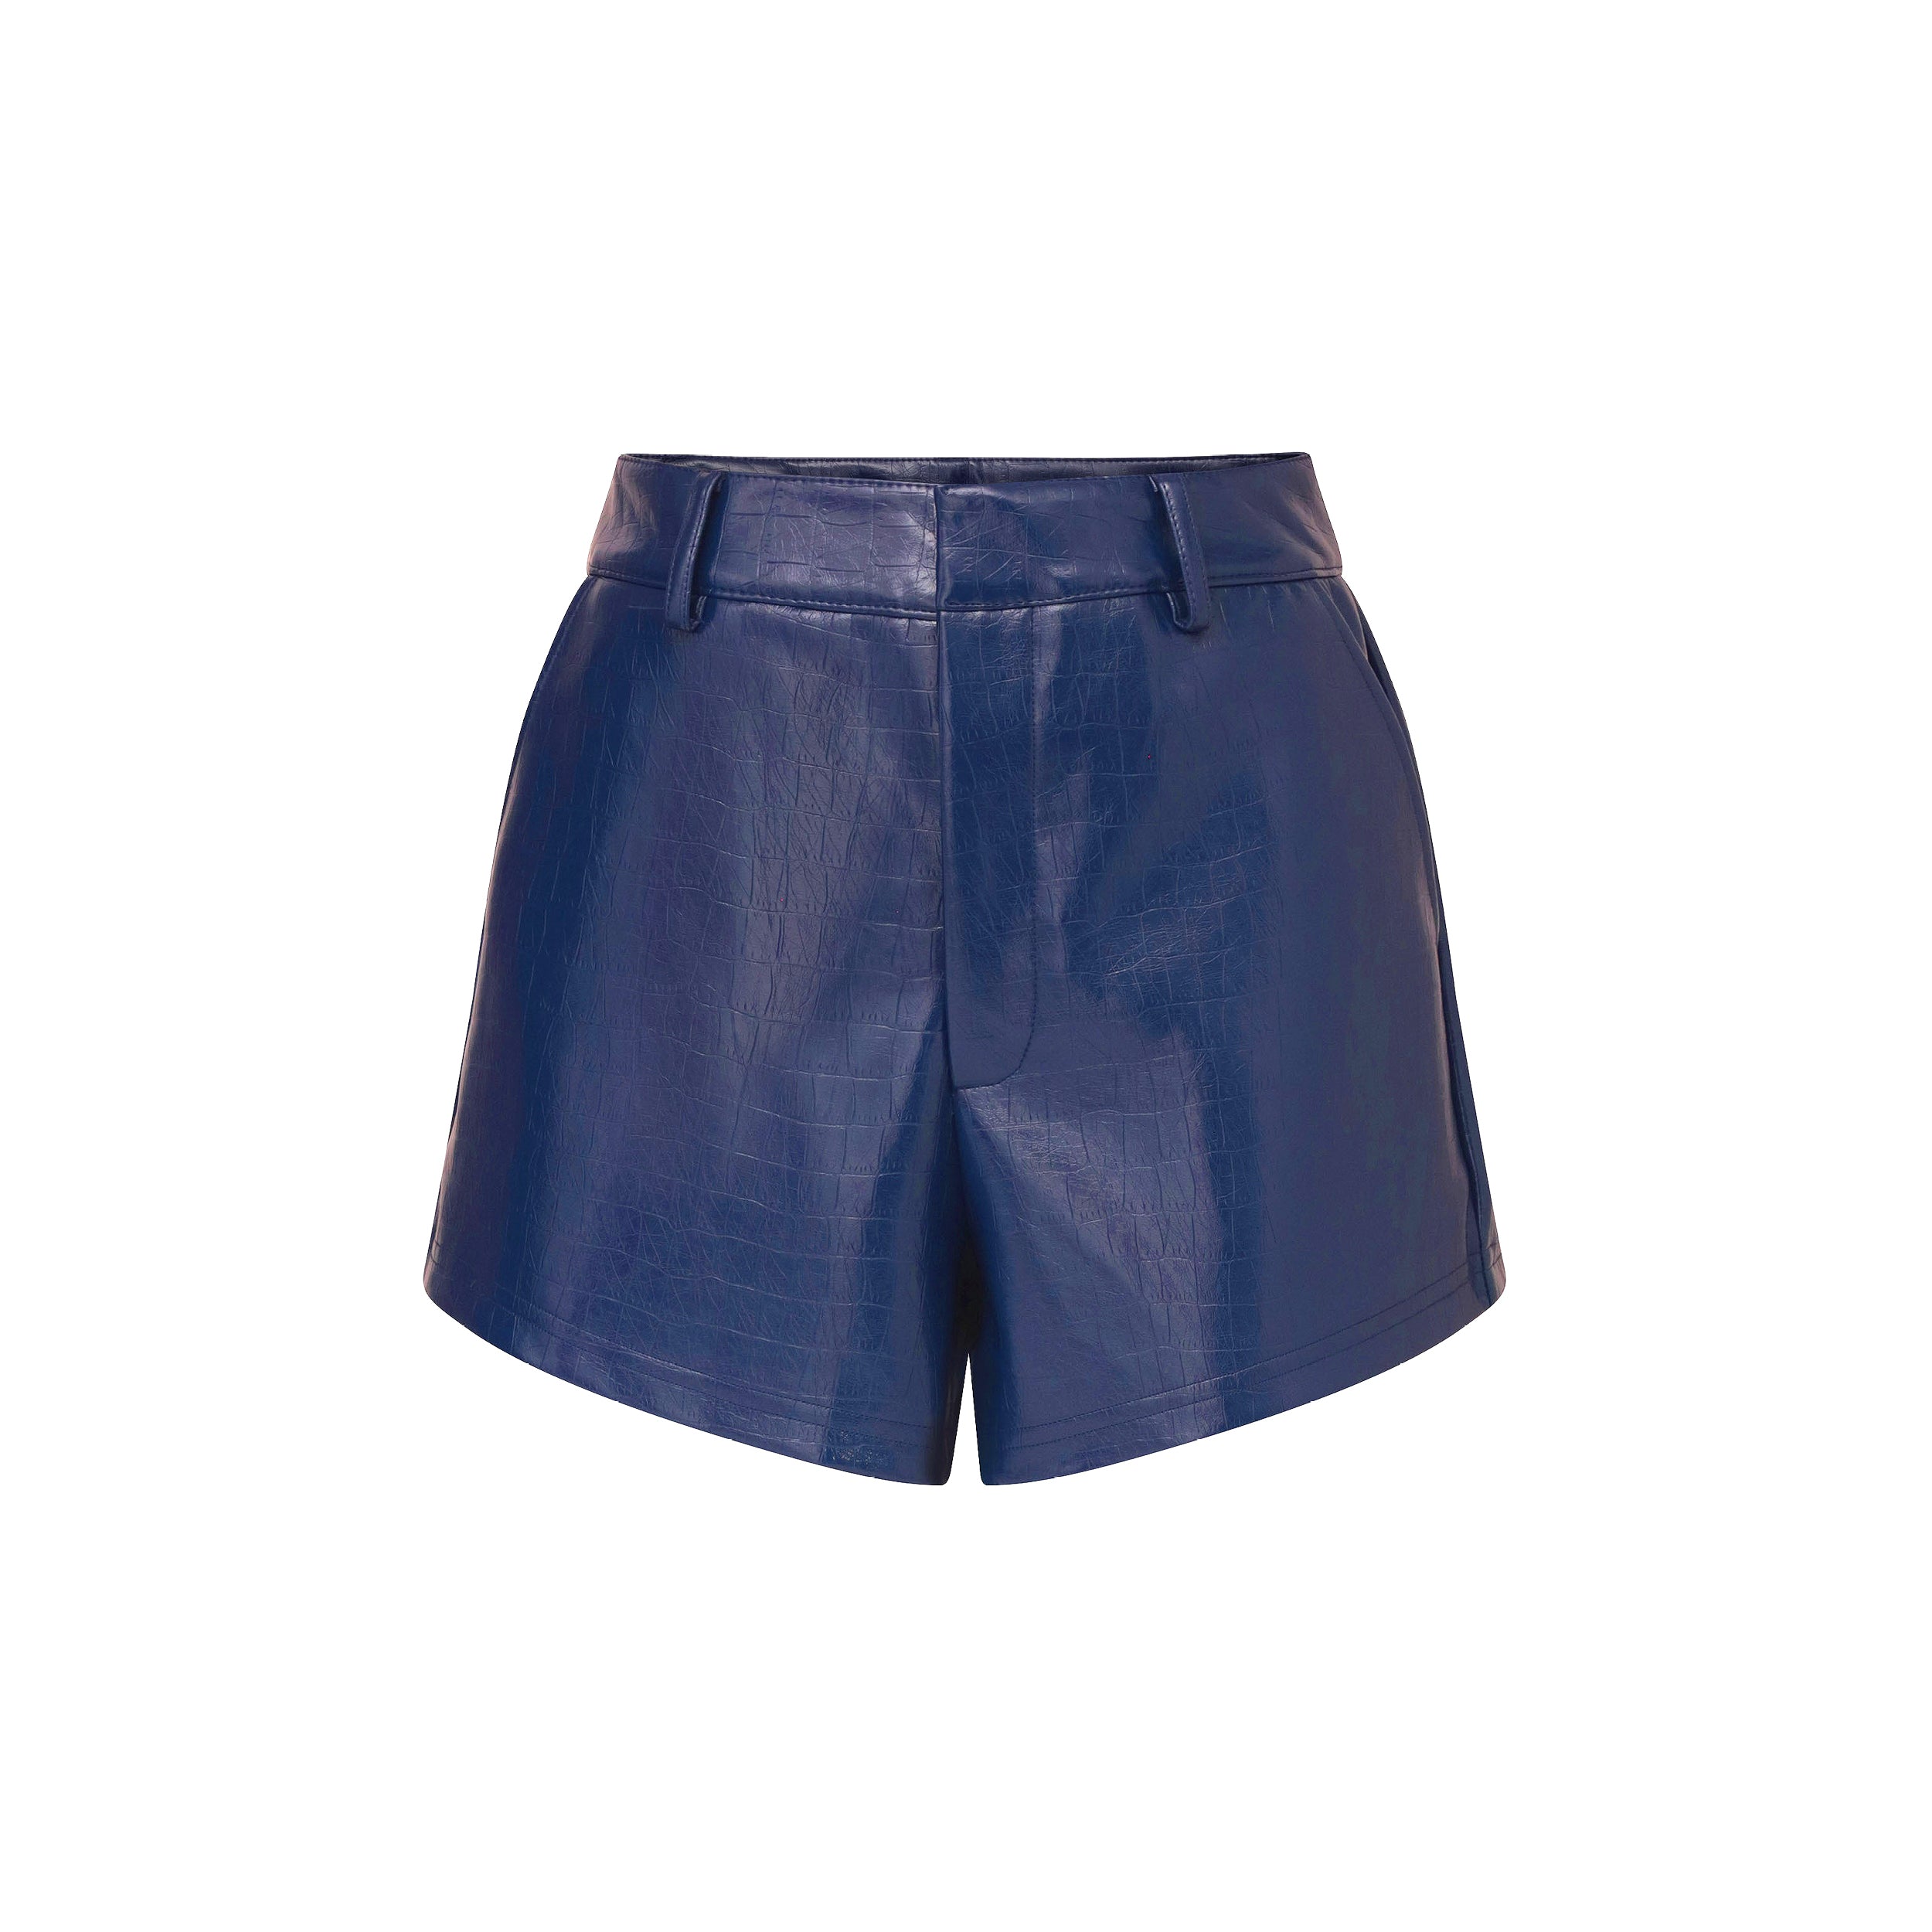 Front view product shot of blue faux leather short with croco embossed pattern.